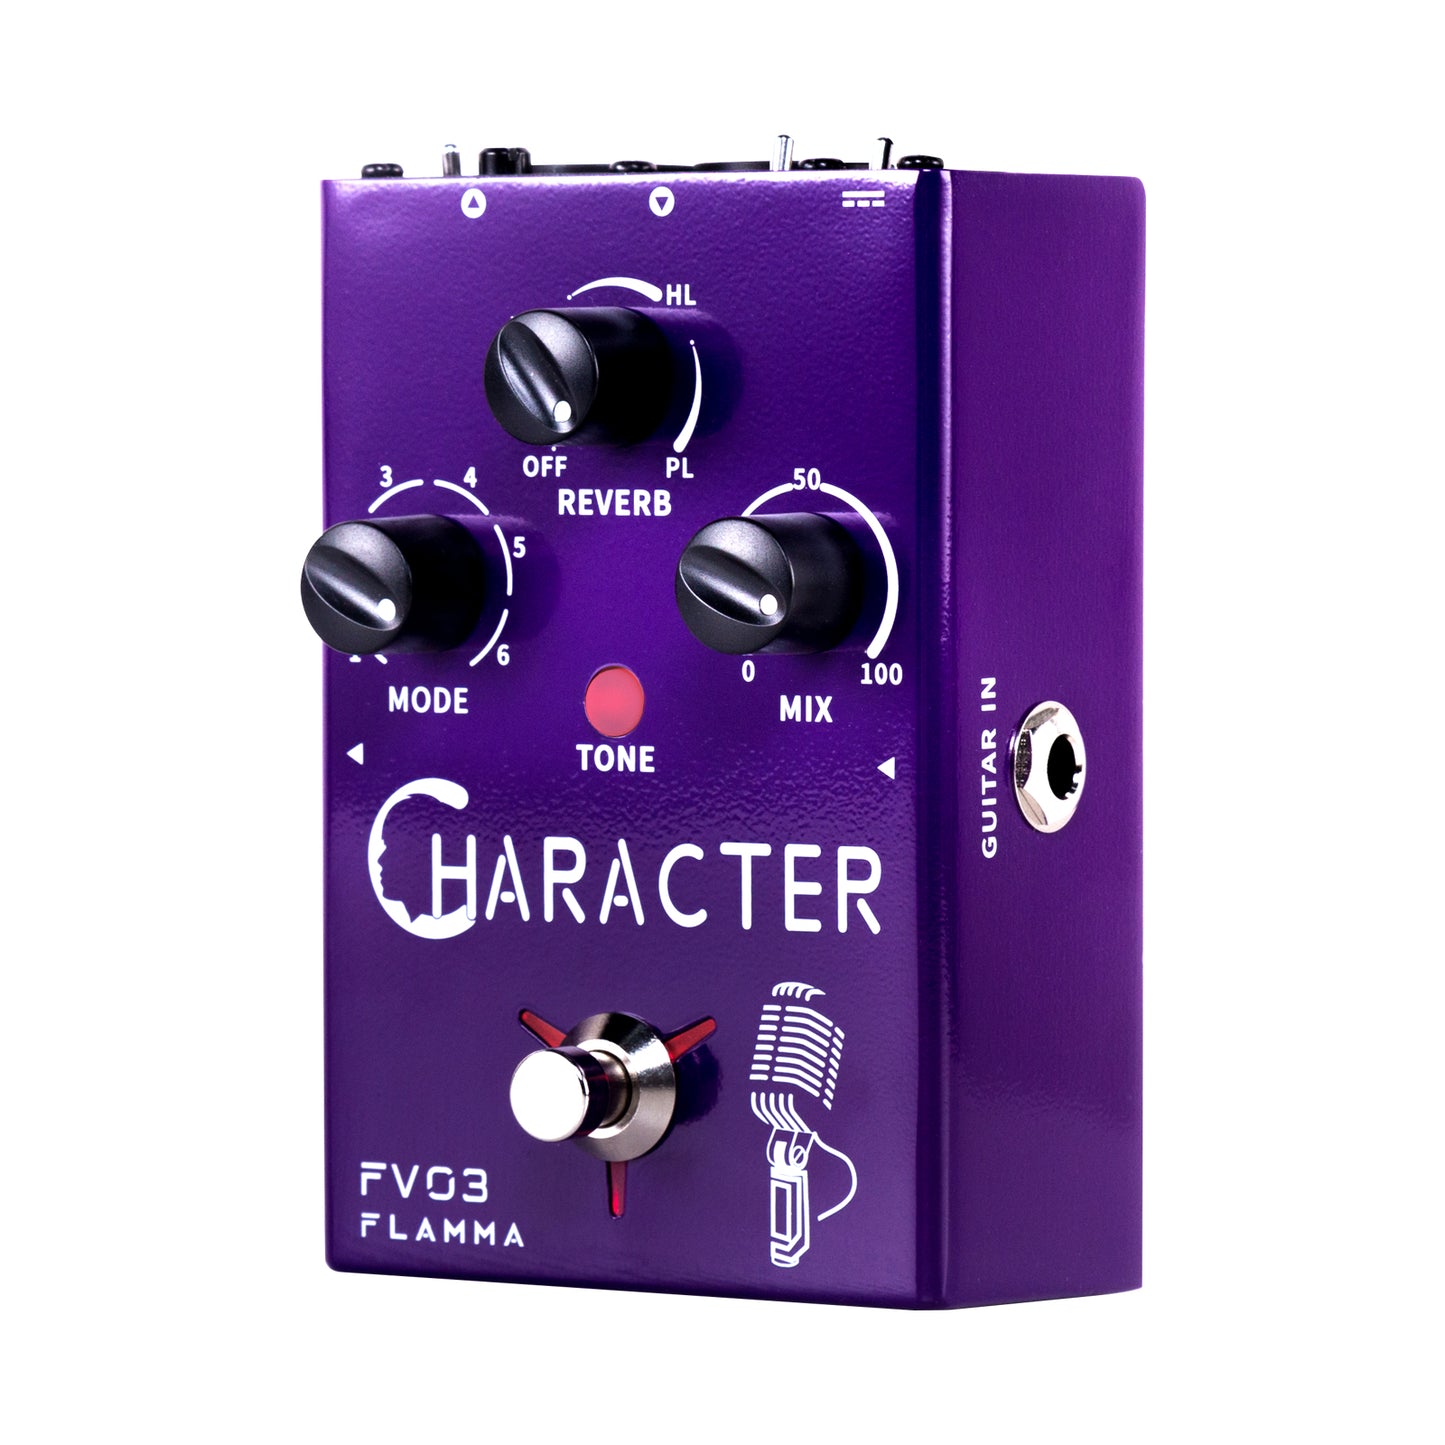 FLAMMA FV03 Character Vocal Effects Pedal